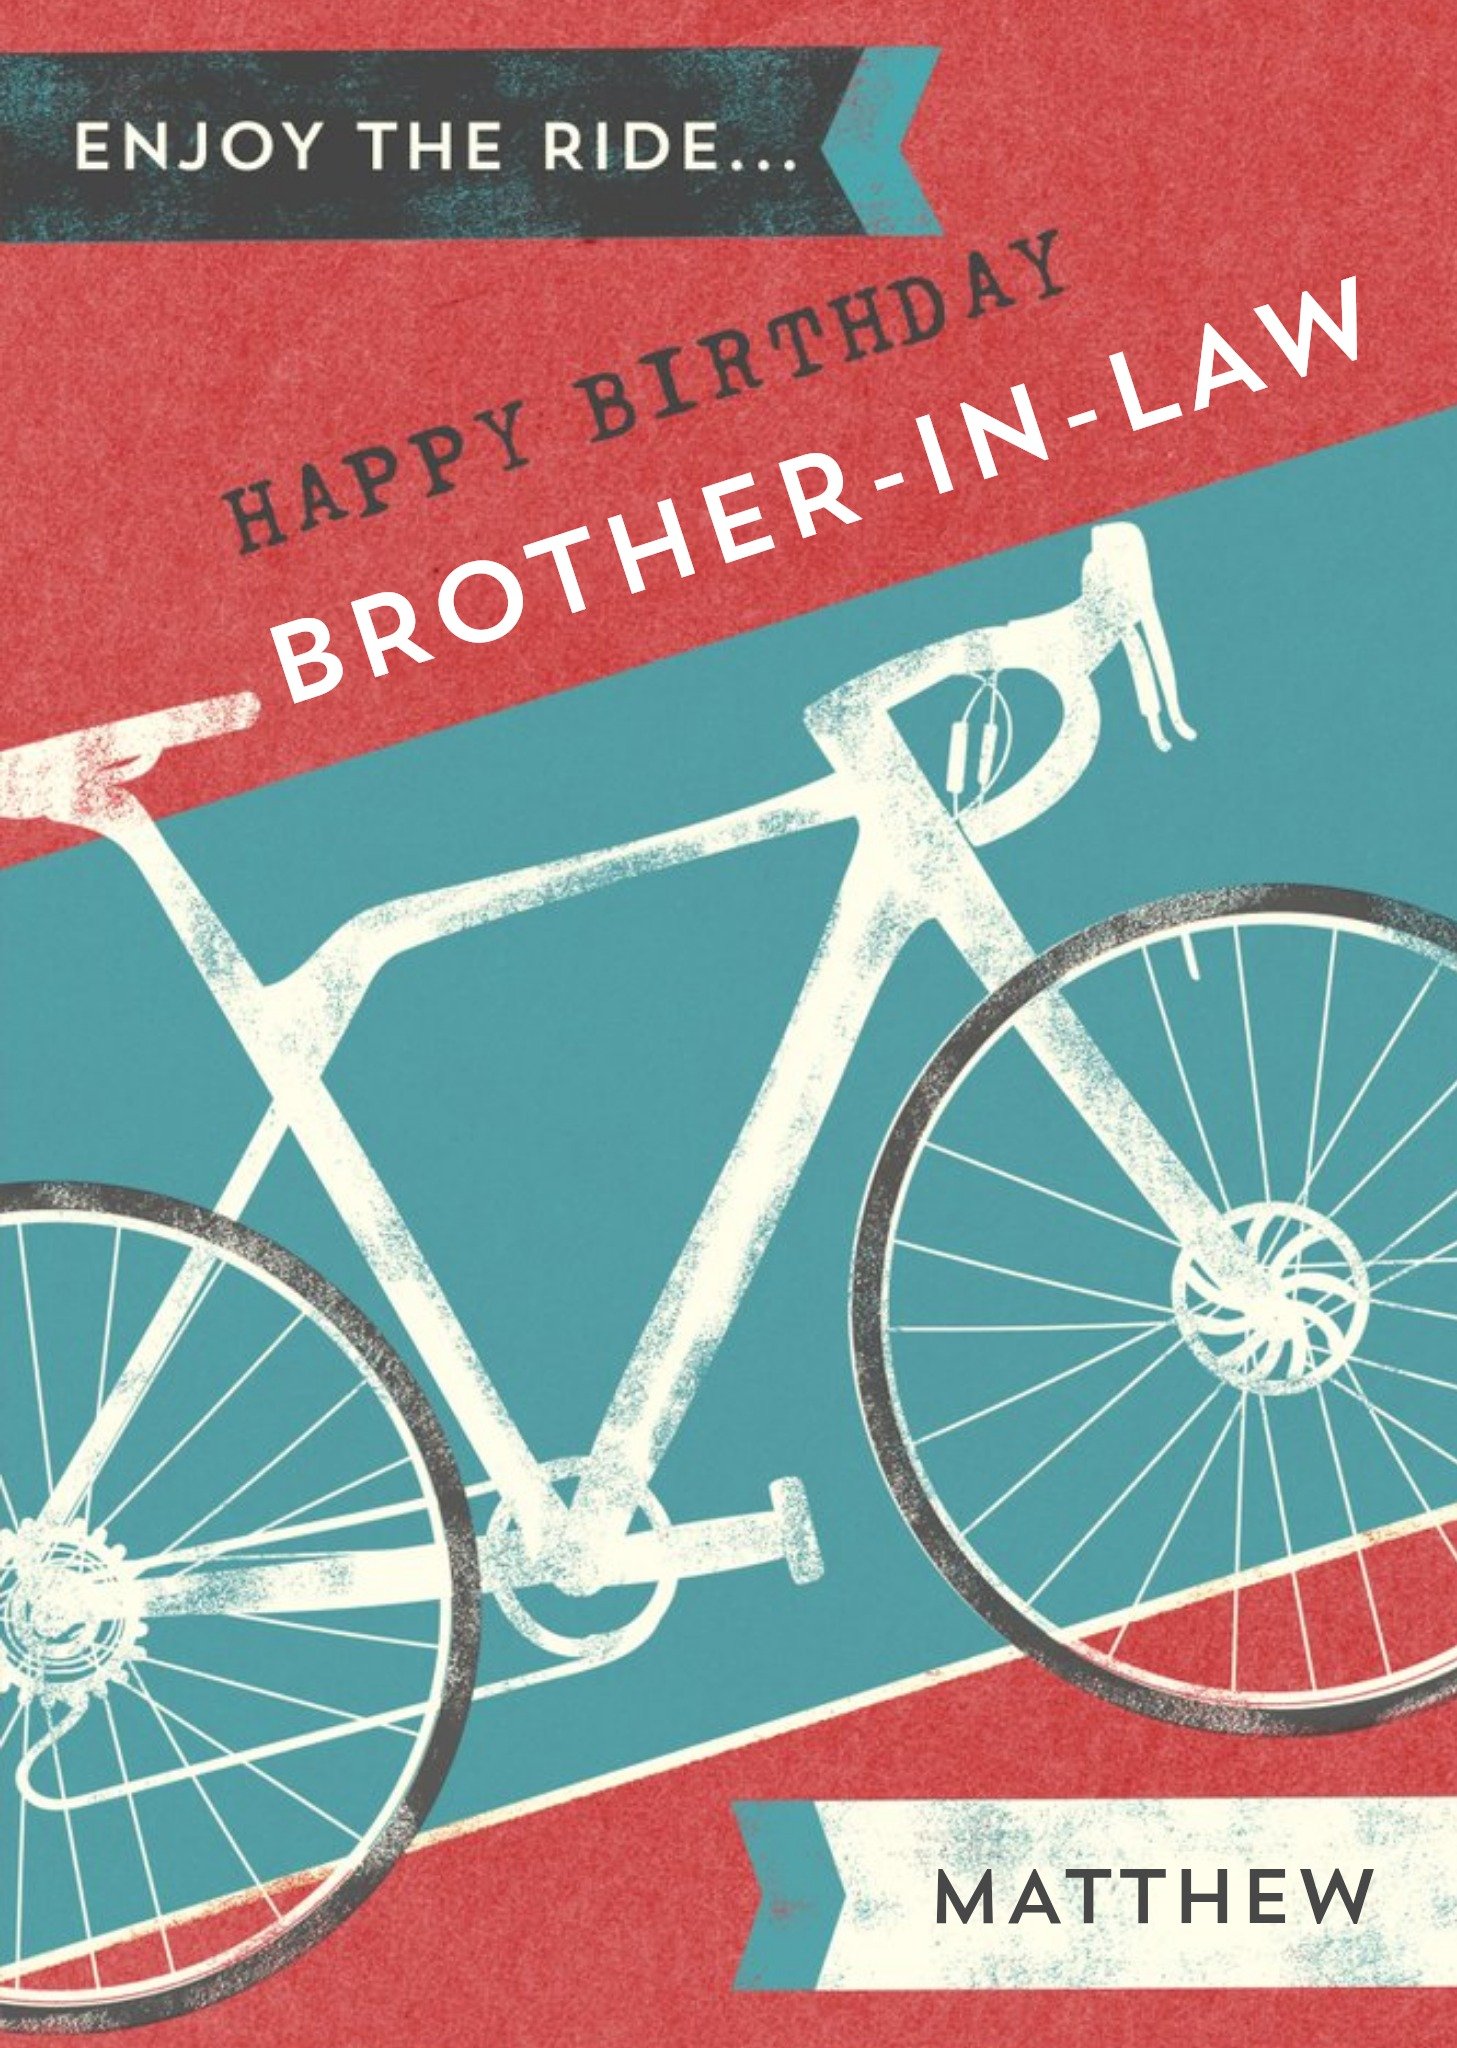 Moonpig Cycling Cycle Bike Bicycle Birthday Card For Brother-In-Law, Large